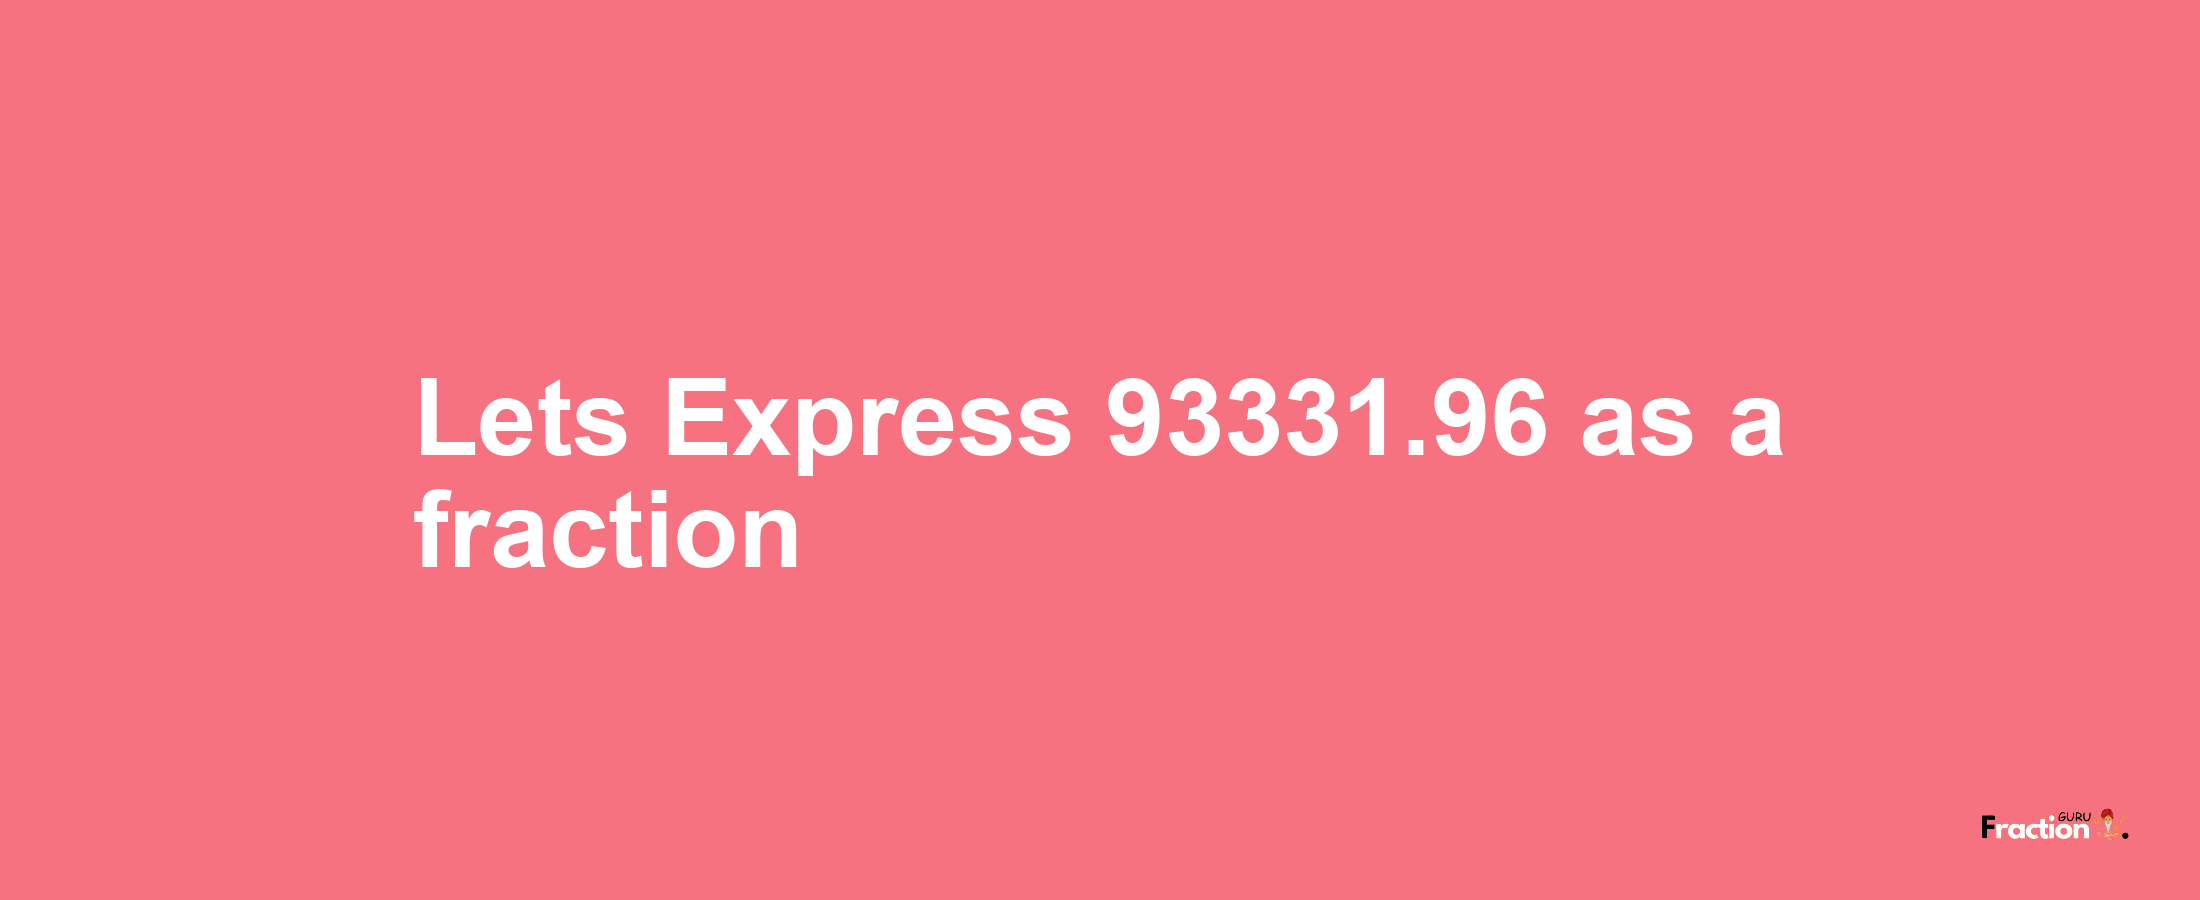 Lets Express 93331.96 as afraction